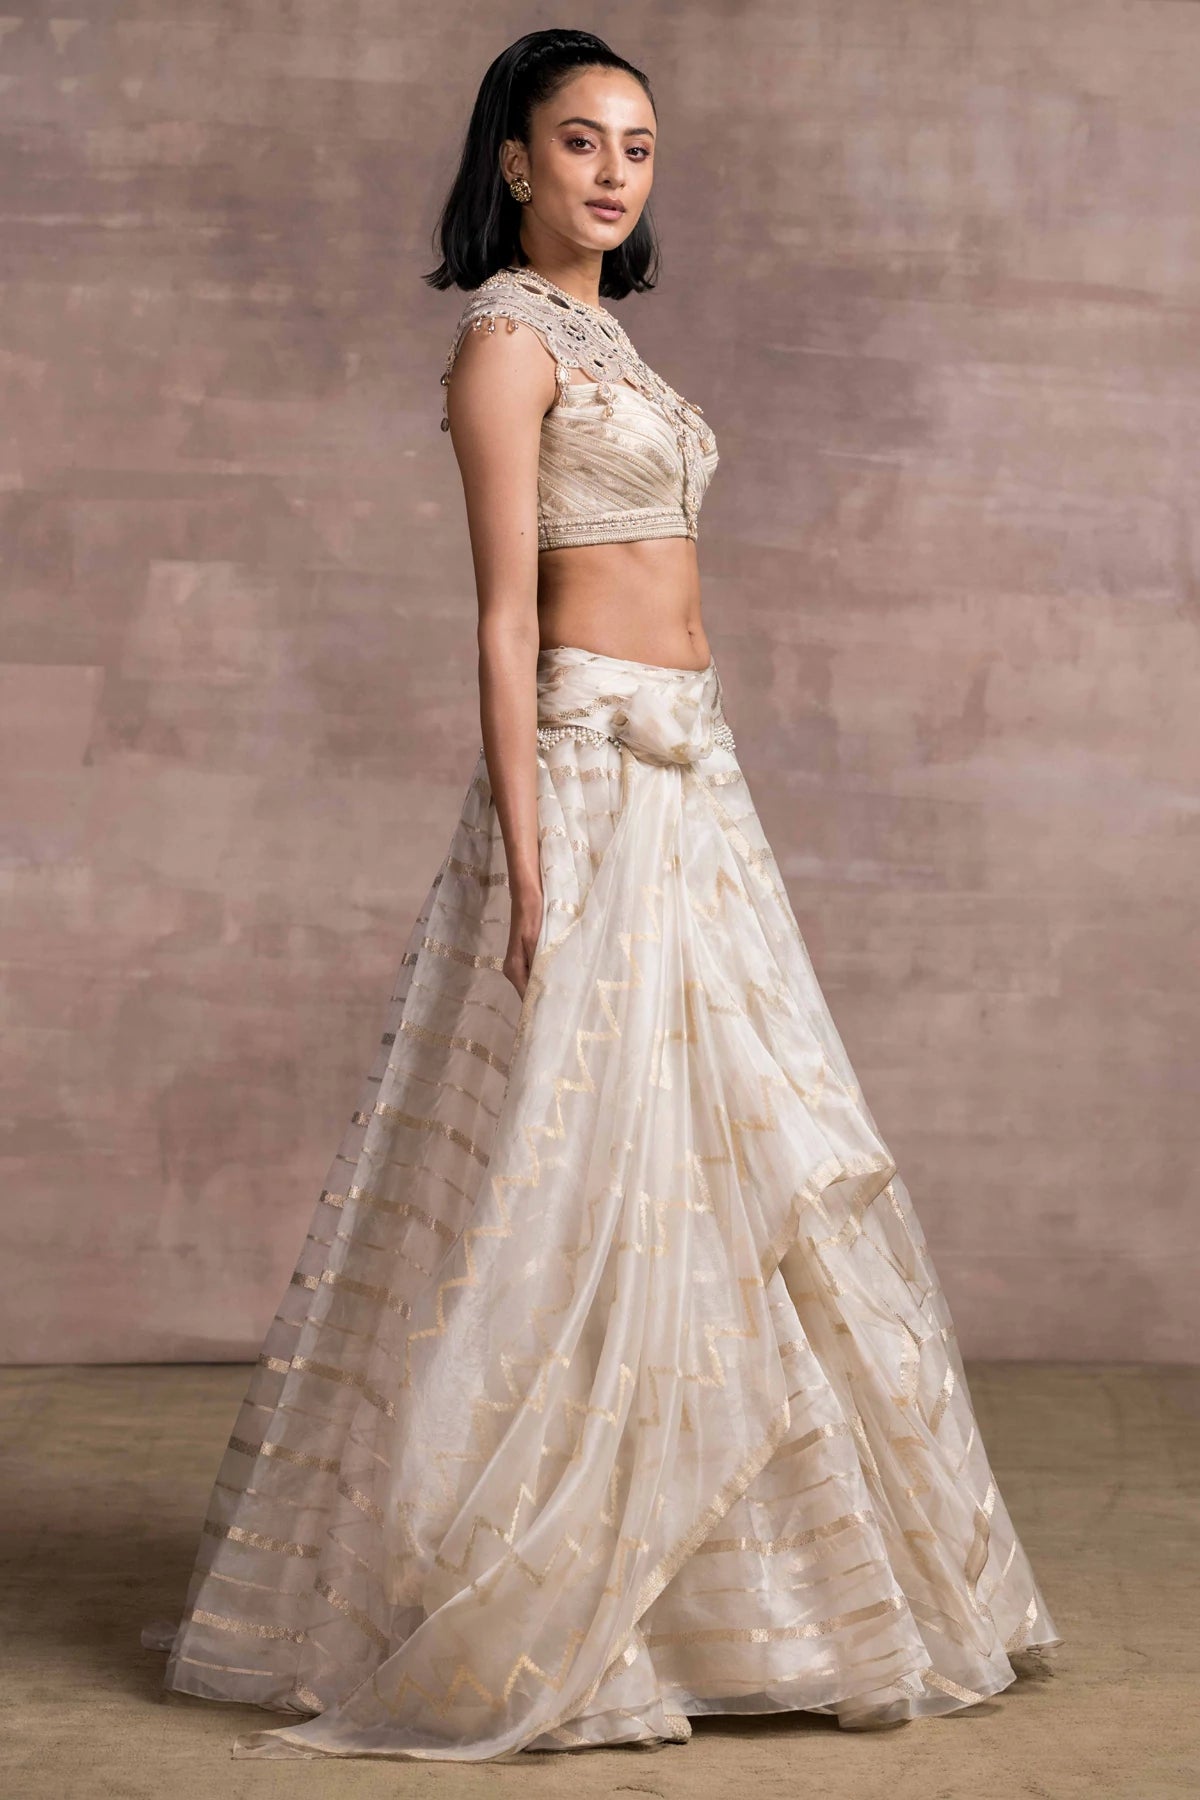 Ivory Bow Lehenga - Indian Clothing in Denver, CO, Aurora, CO, Boulder, CO, Fort Collins, CO, Colorado Springs, CO, Parker, CO, Highlands Ranch, CO, Cherry Creek, CO, Centennial, CO, and Longmont, CO. Nationwide shipping USA - India Fashion X